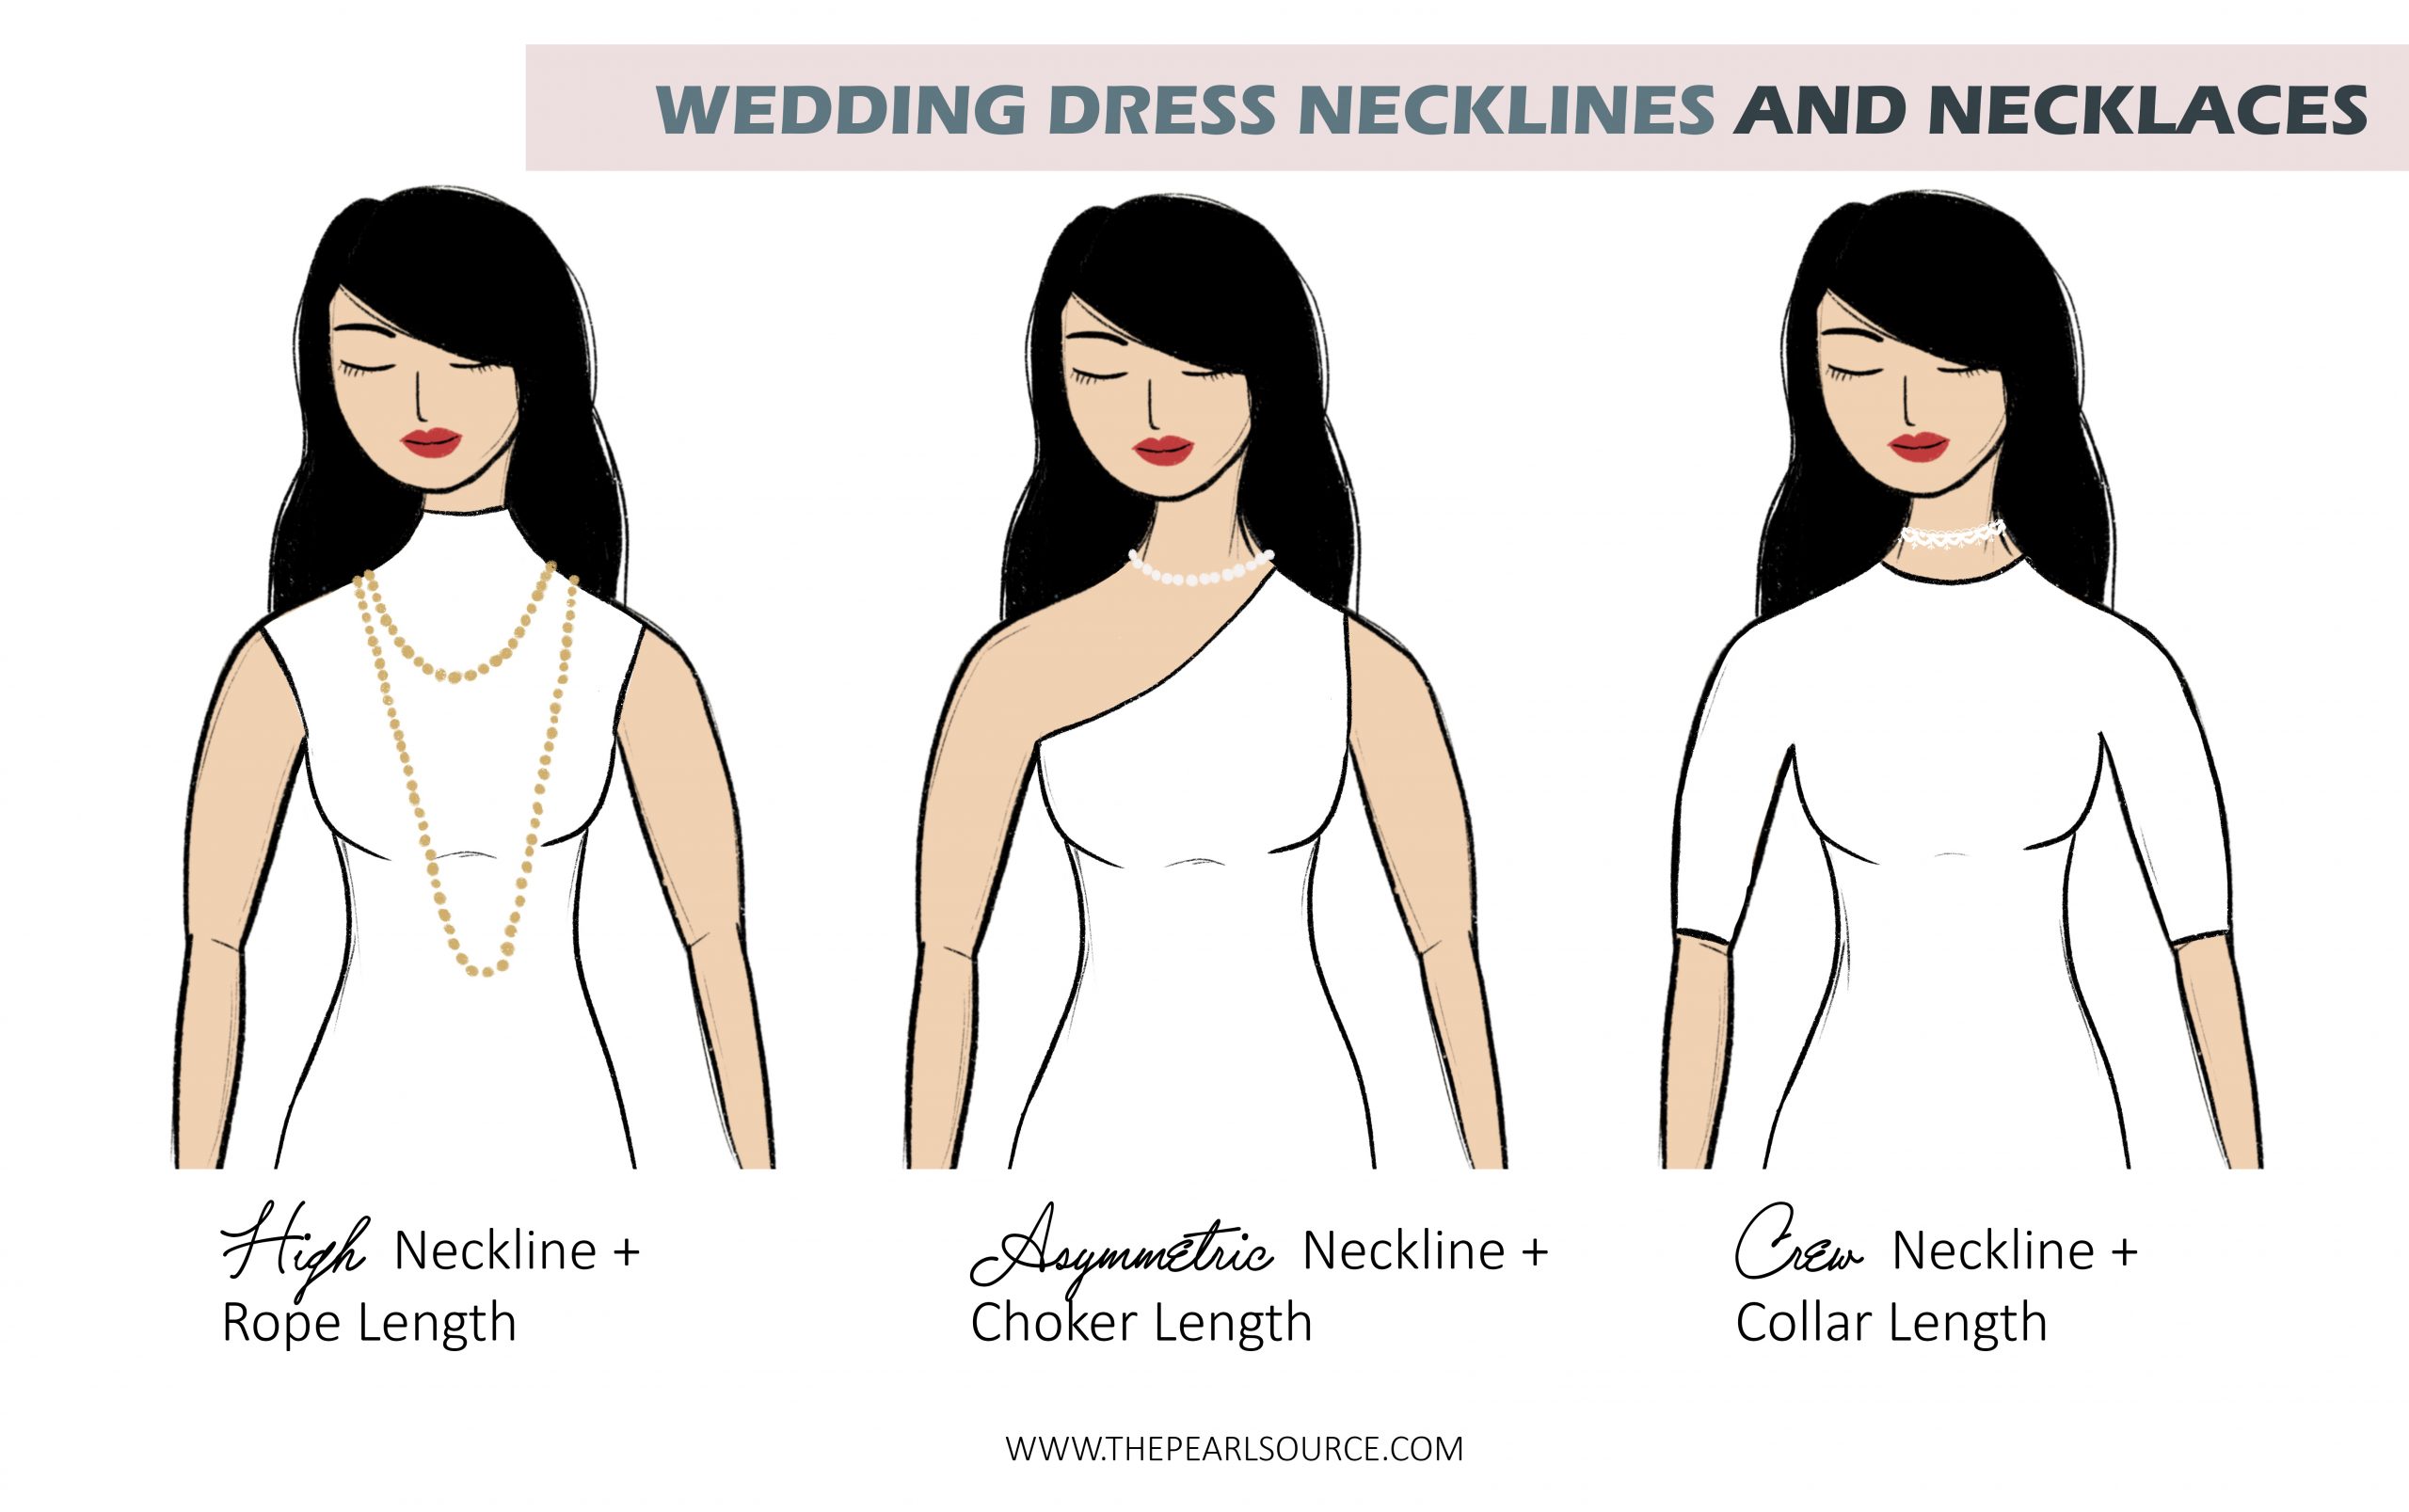 A Guide To Your Most Flattering Necklines  Fashion tips, Neckline necklace  guide, Style